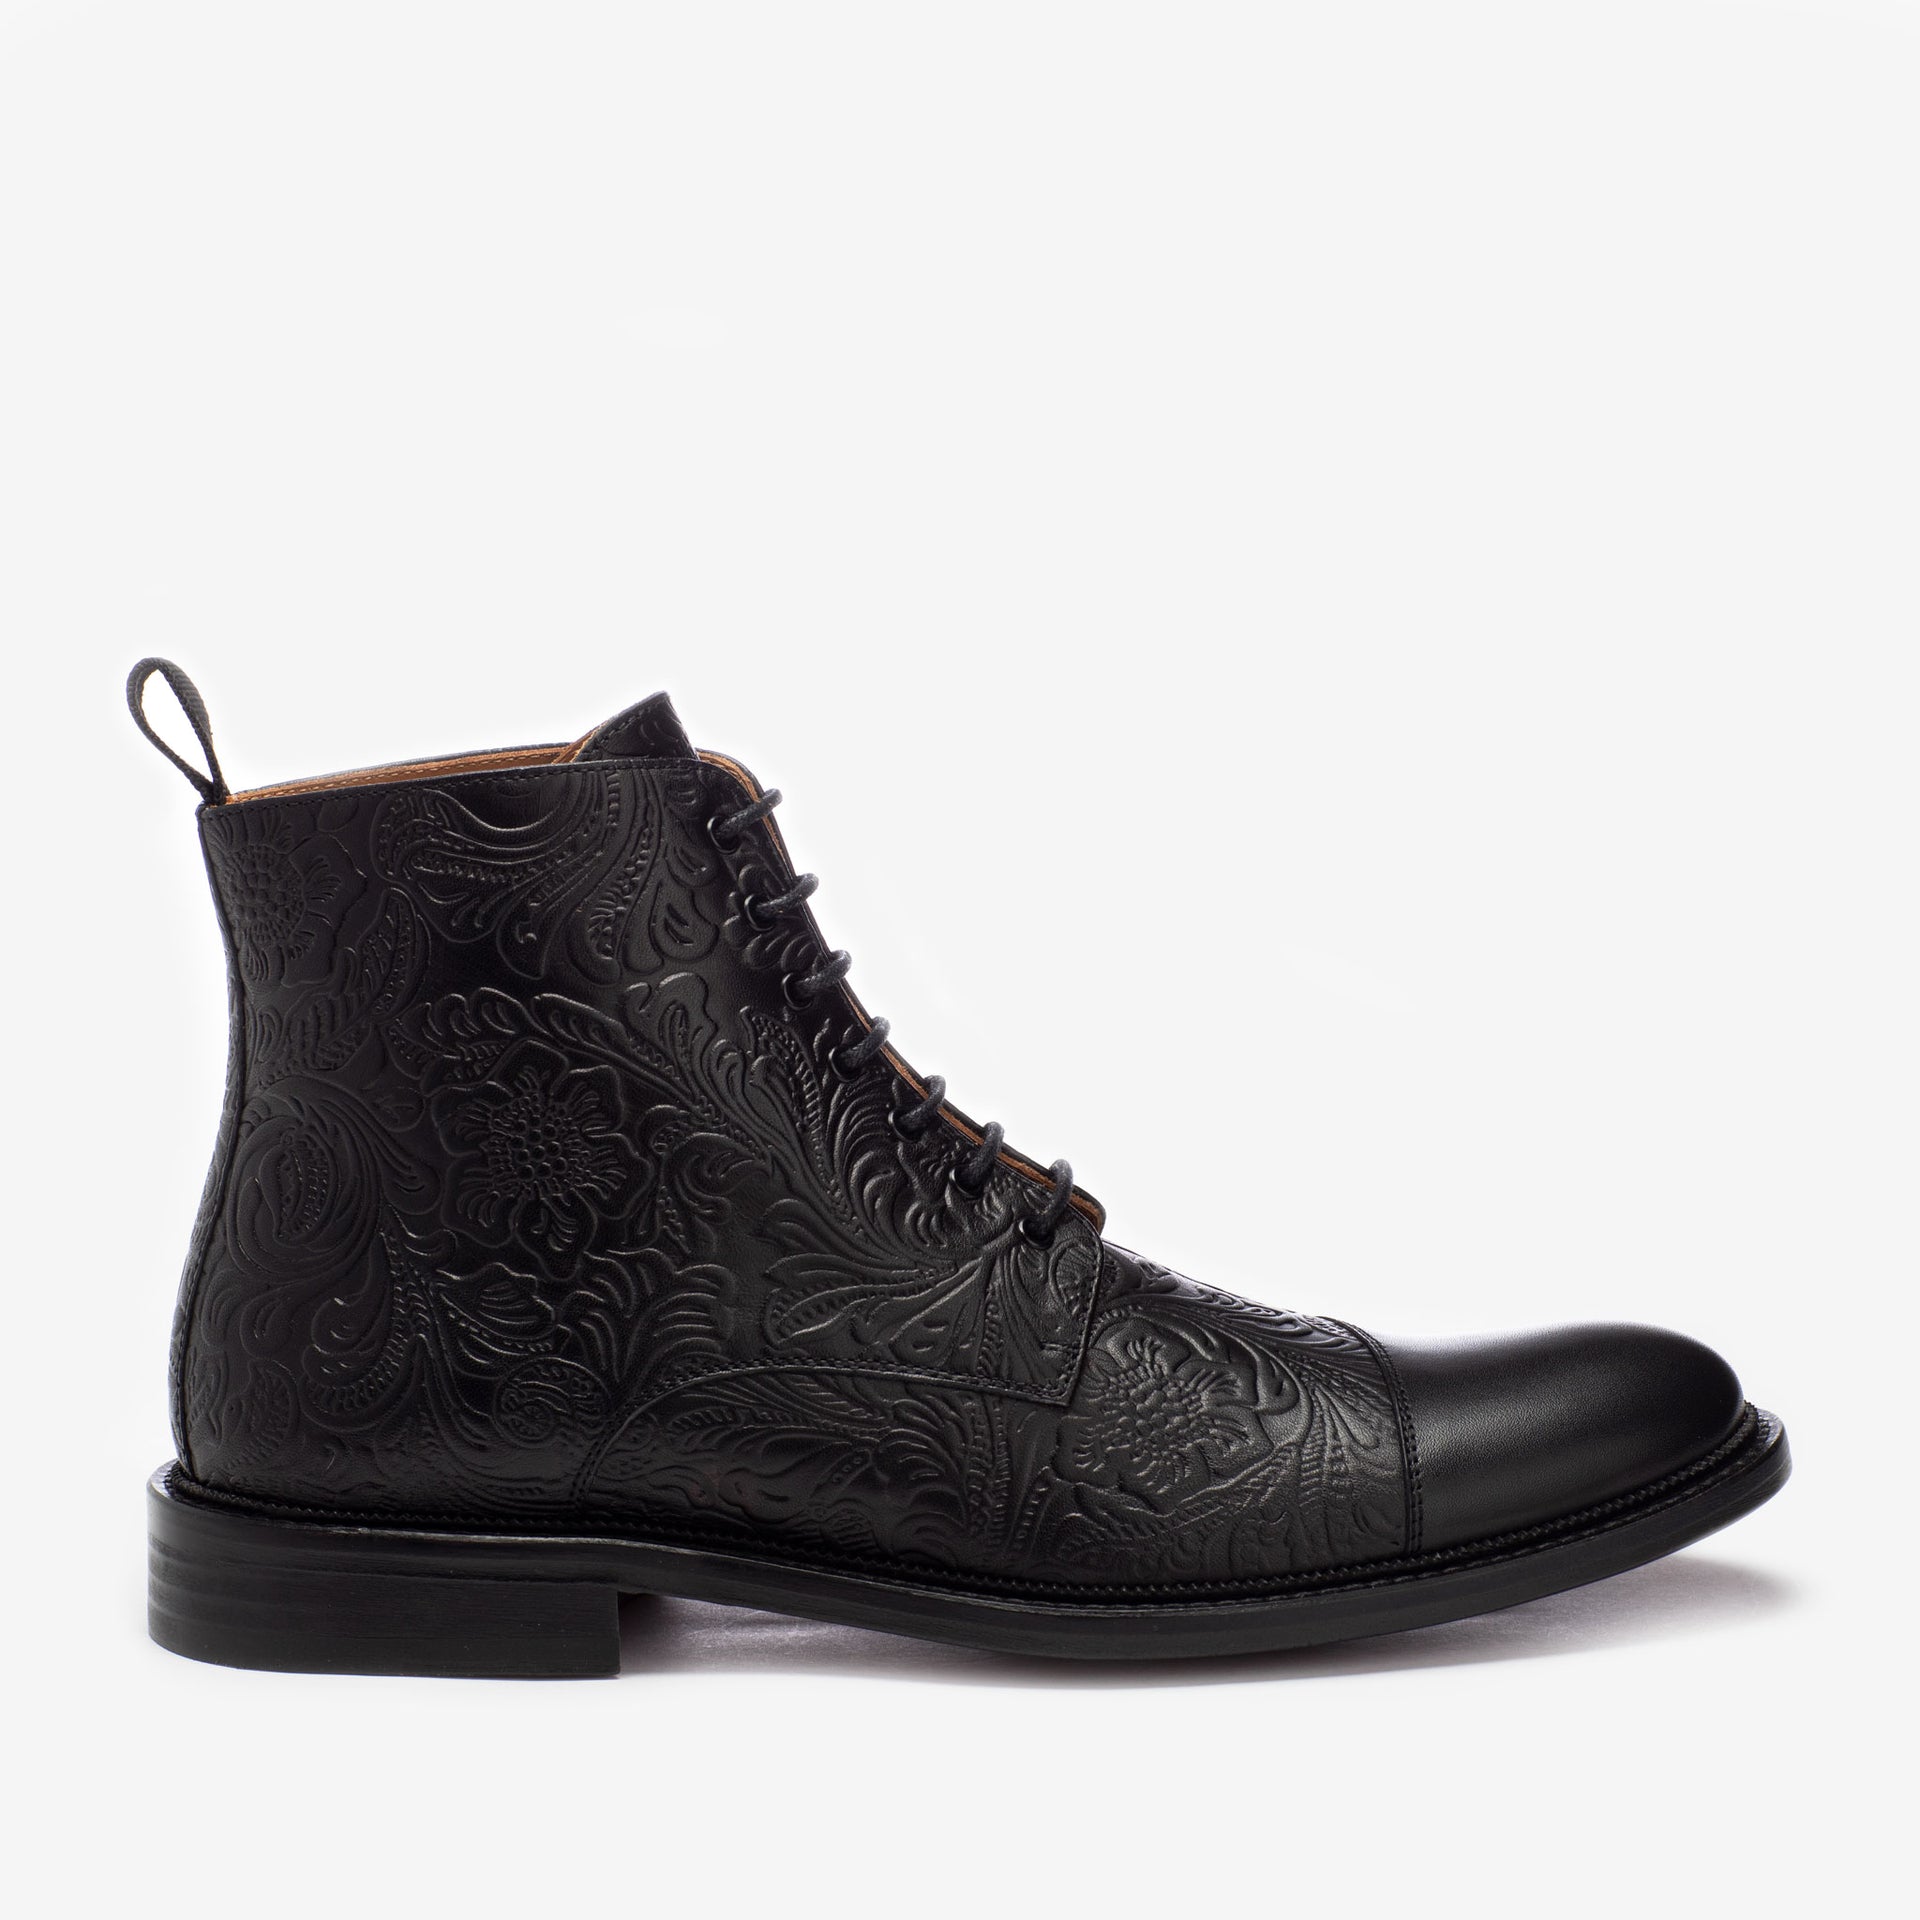 The Paris Boot in Black Floral - Ankle Boots | TAFT